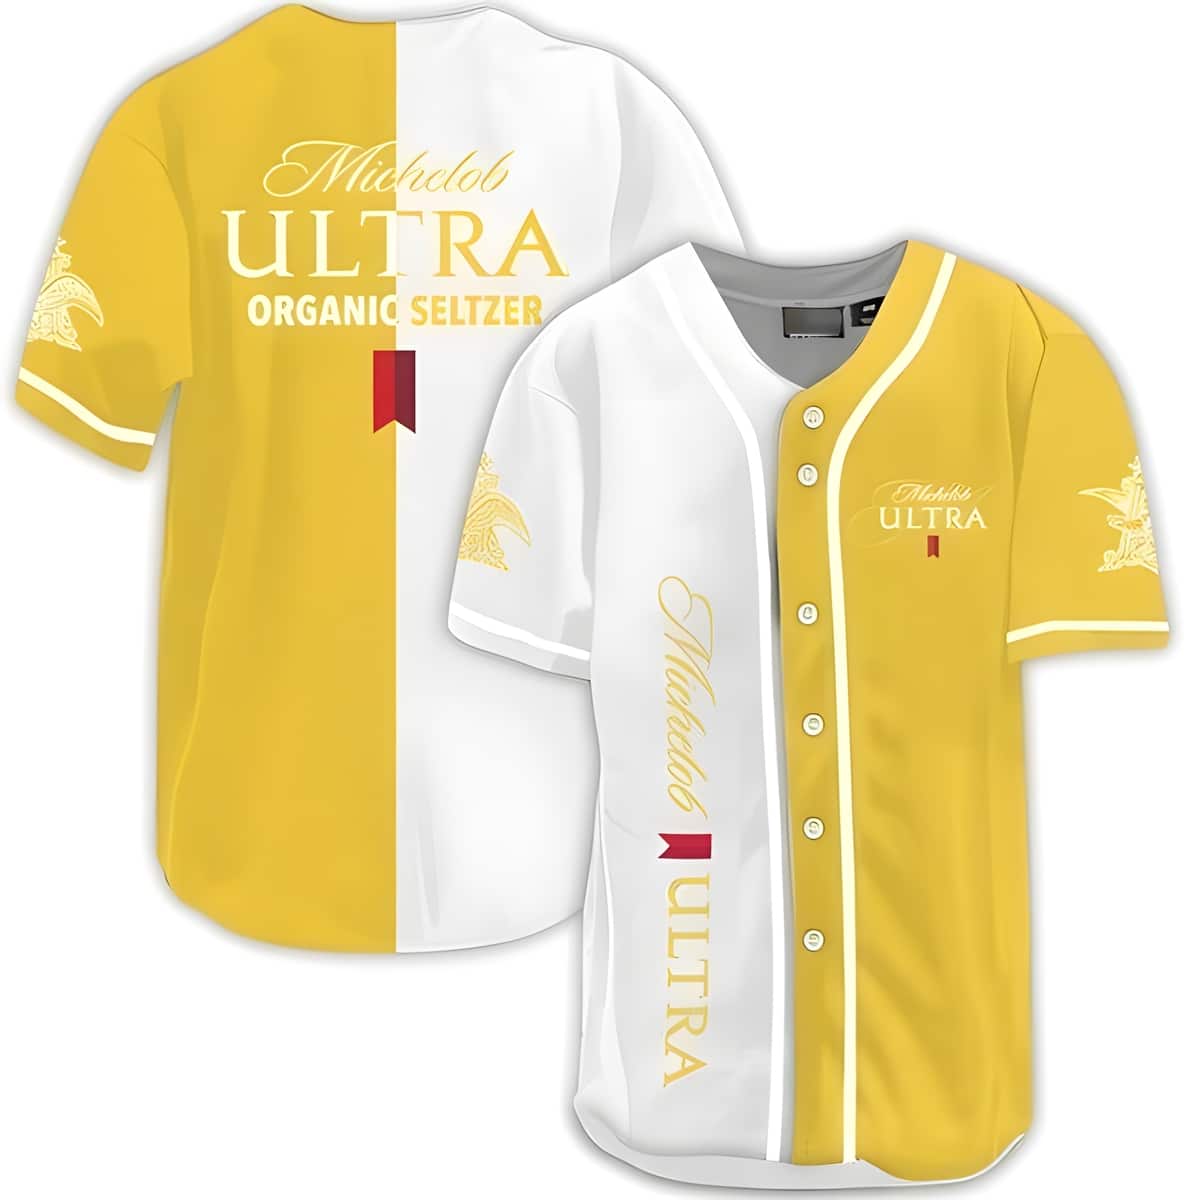 Michelob ULTRA Baseball Jersey Yellow White Dual Colors Organic Seltzer Gift For Family